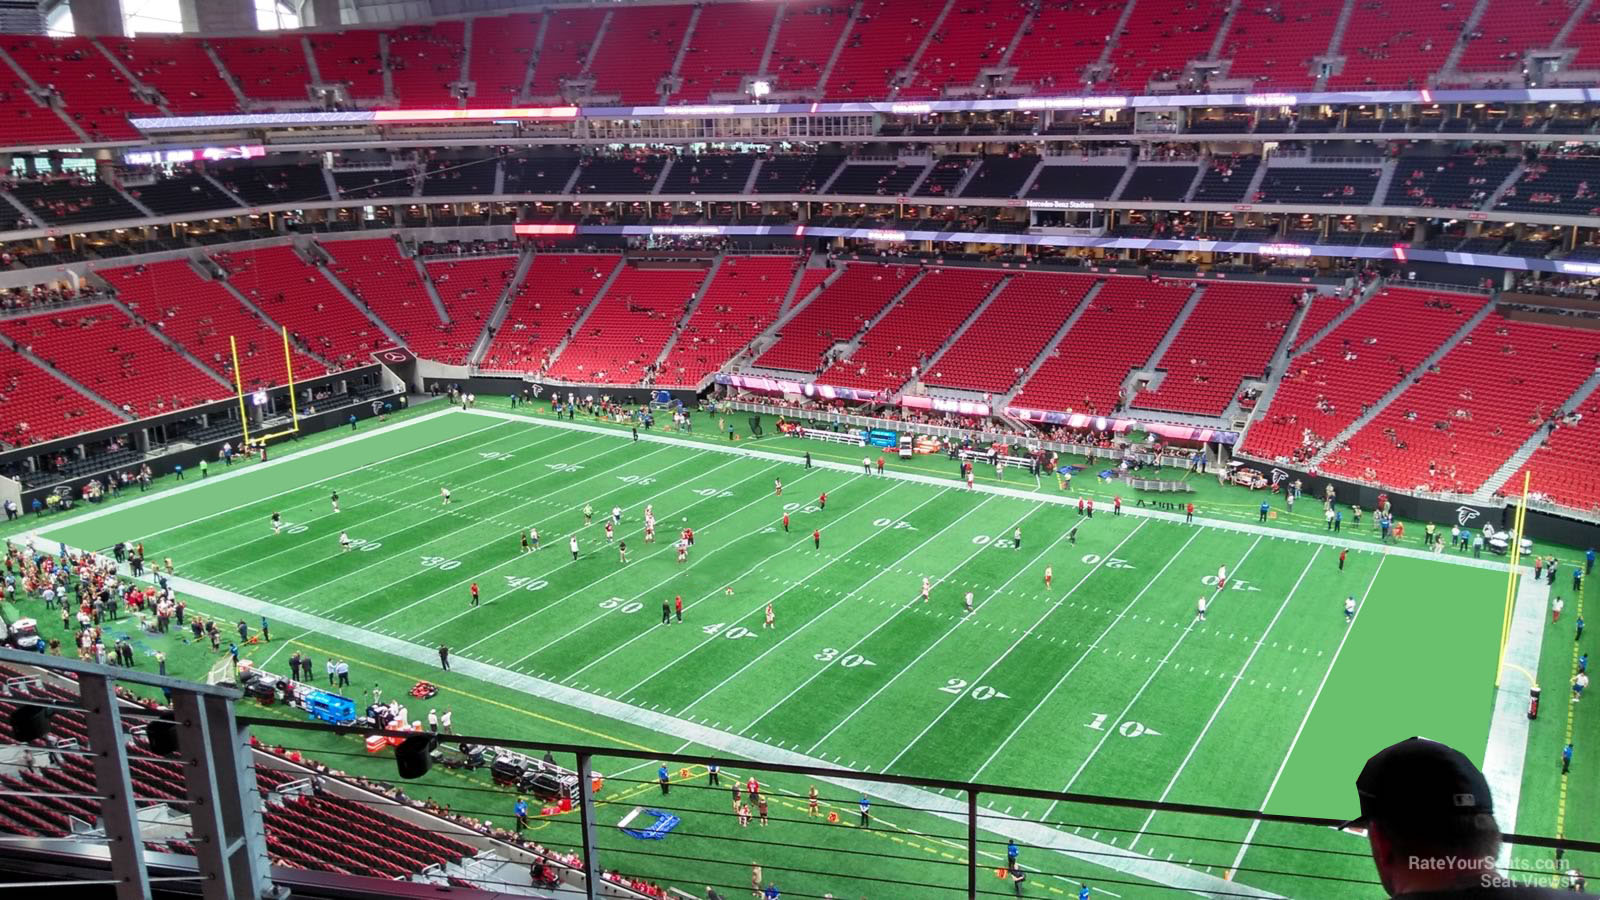 section 307, row 4 seat view  for football - mercedes-benz stadium